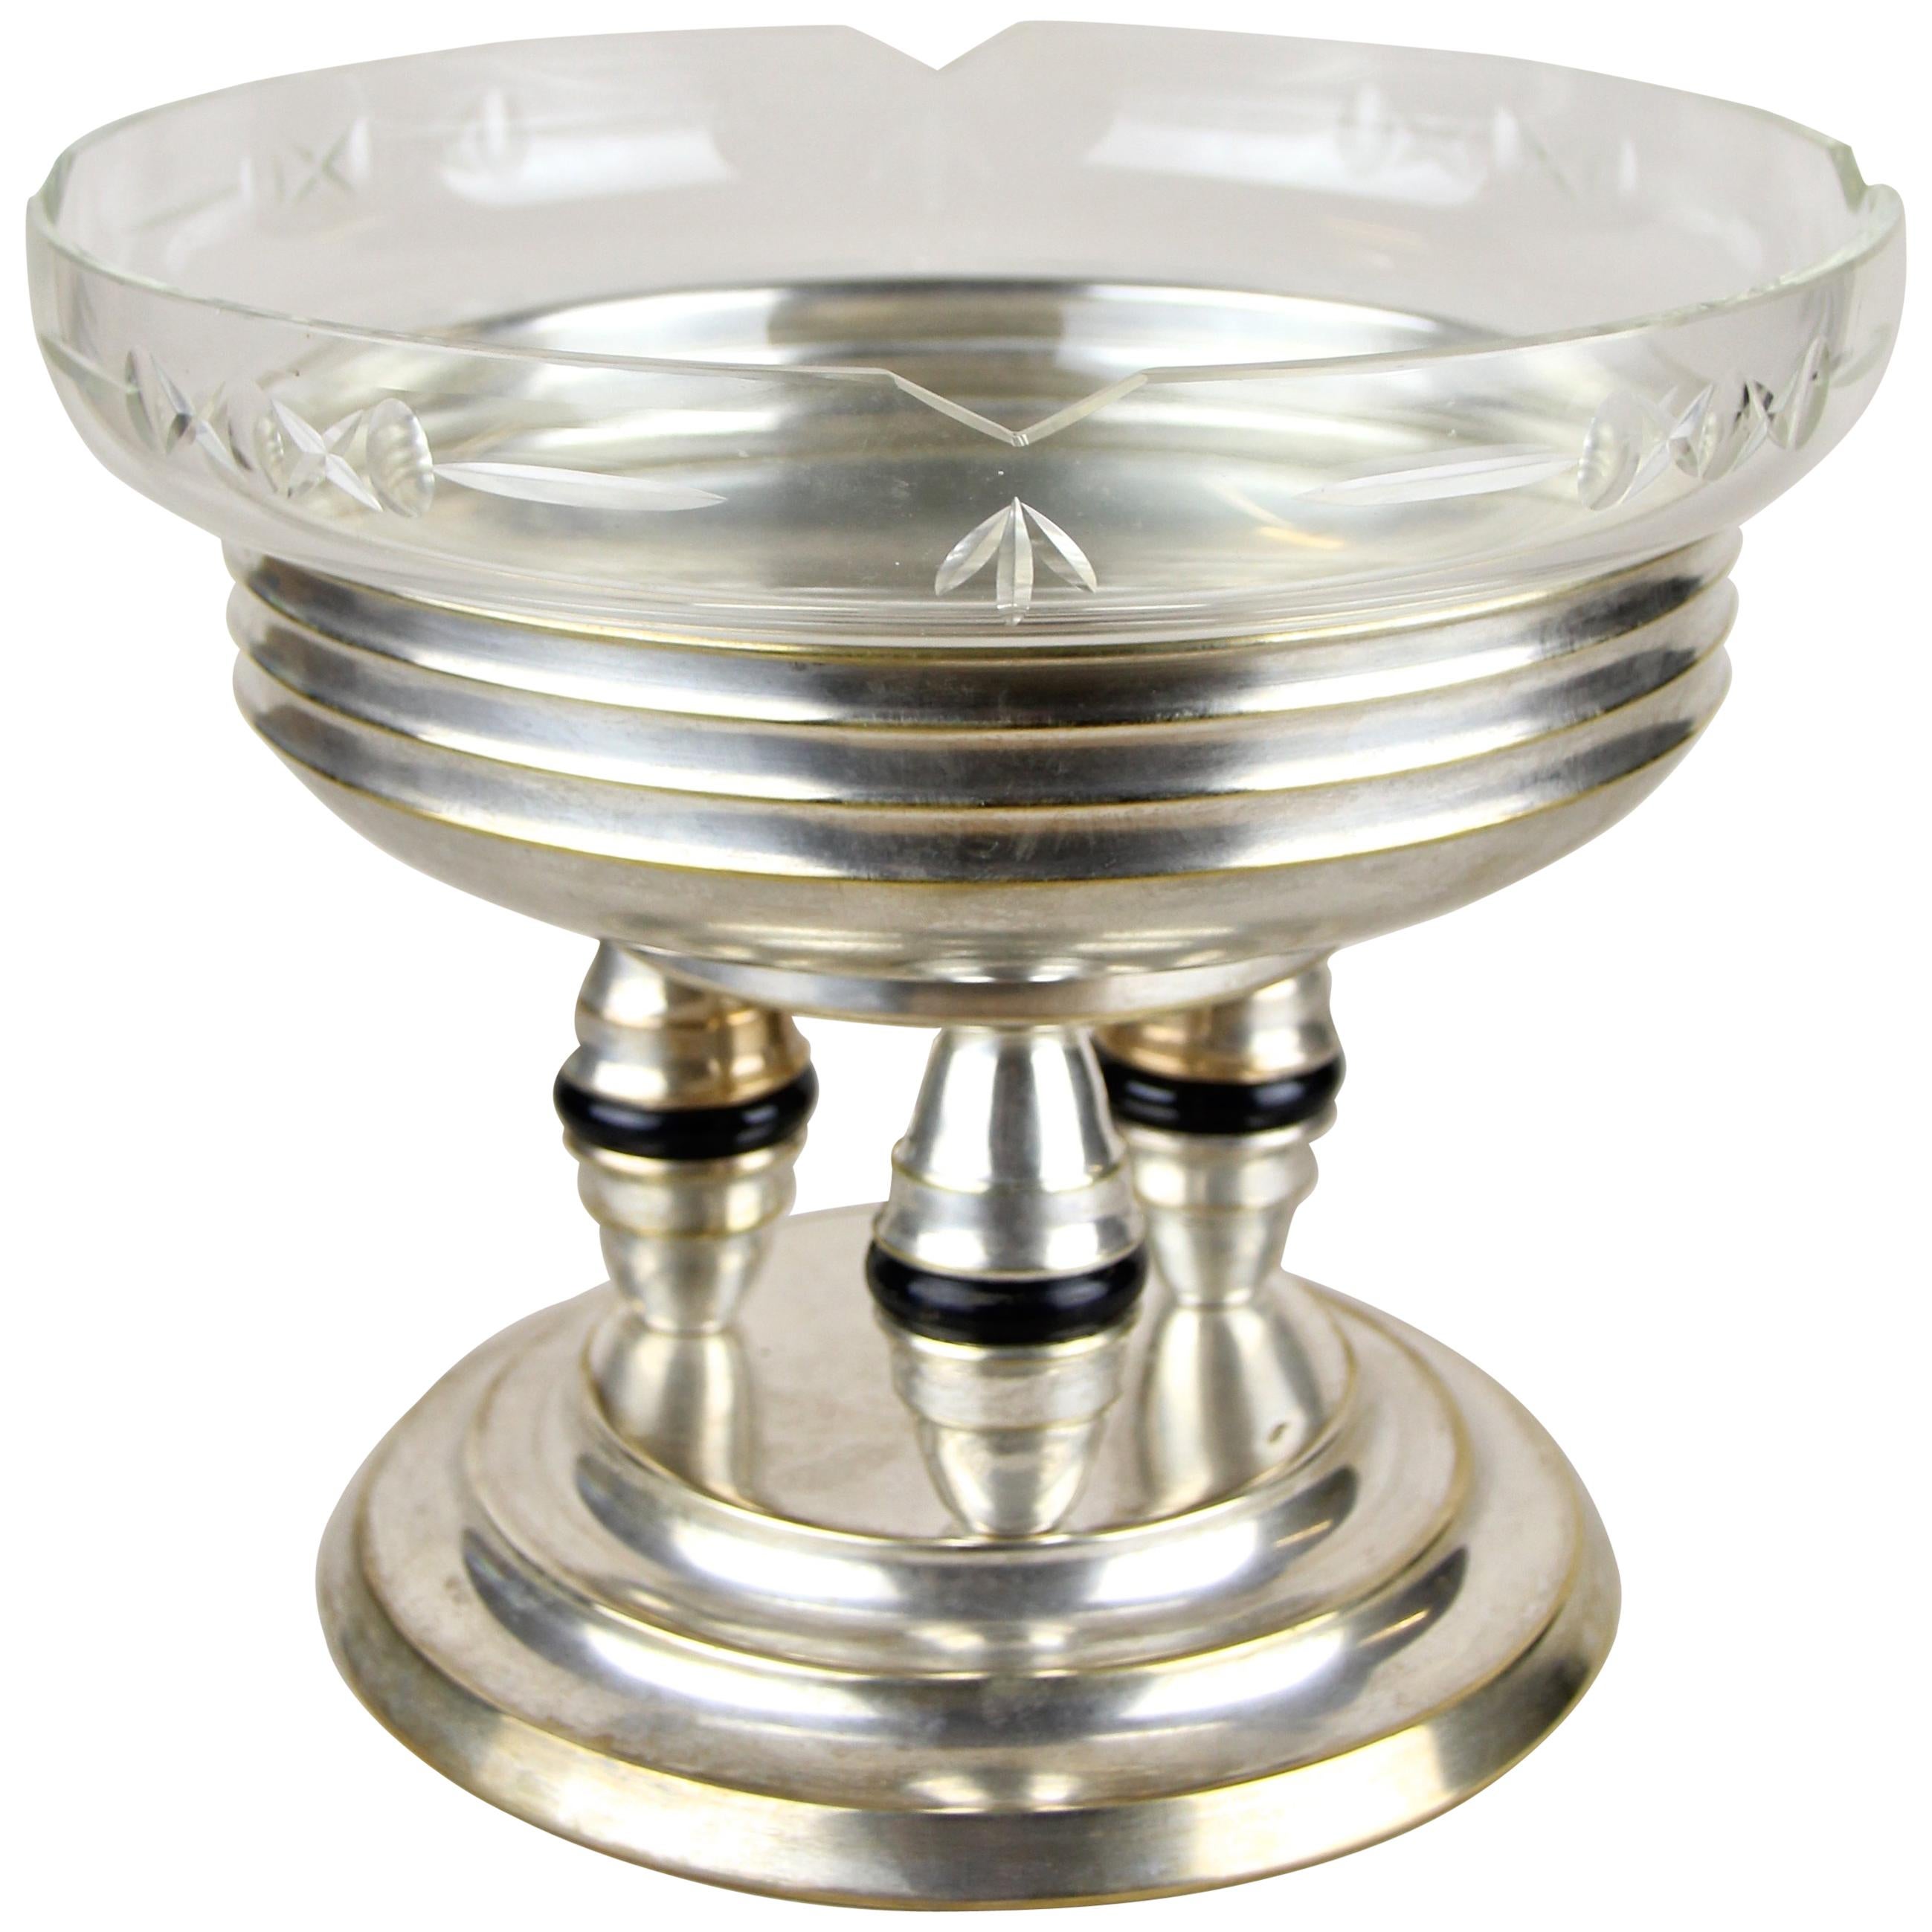 Stunning silvered centerpiece with glass bowl made by the company Lenk in Austria around 1920. The lovely designed base was artfully made of silvered brass. Enthroned on three unusual shaped short columns with black ring applications, sits an